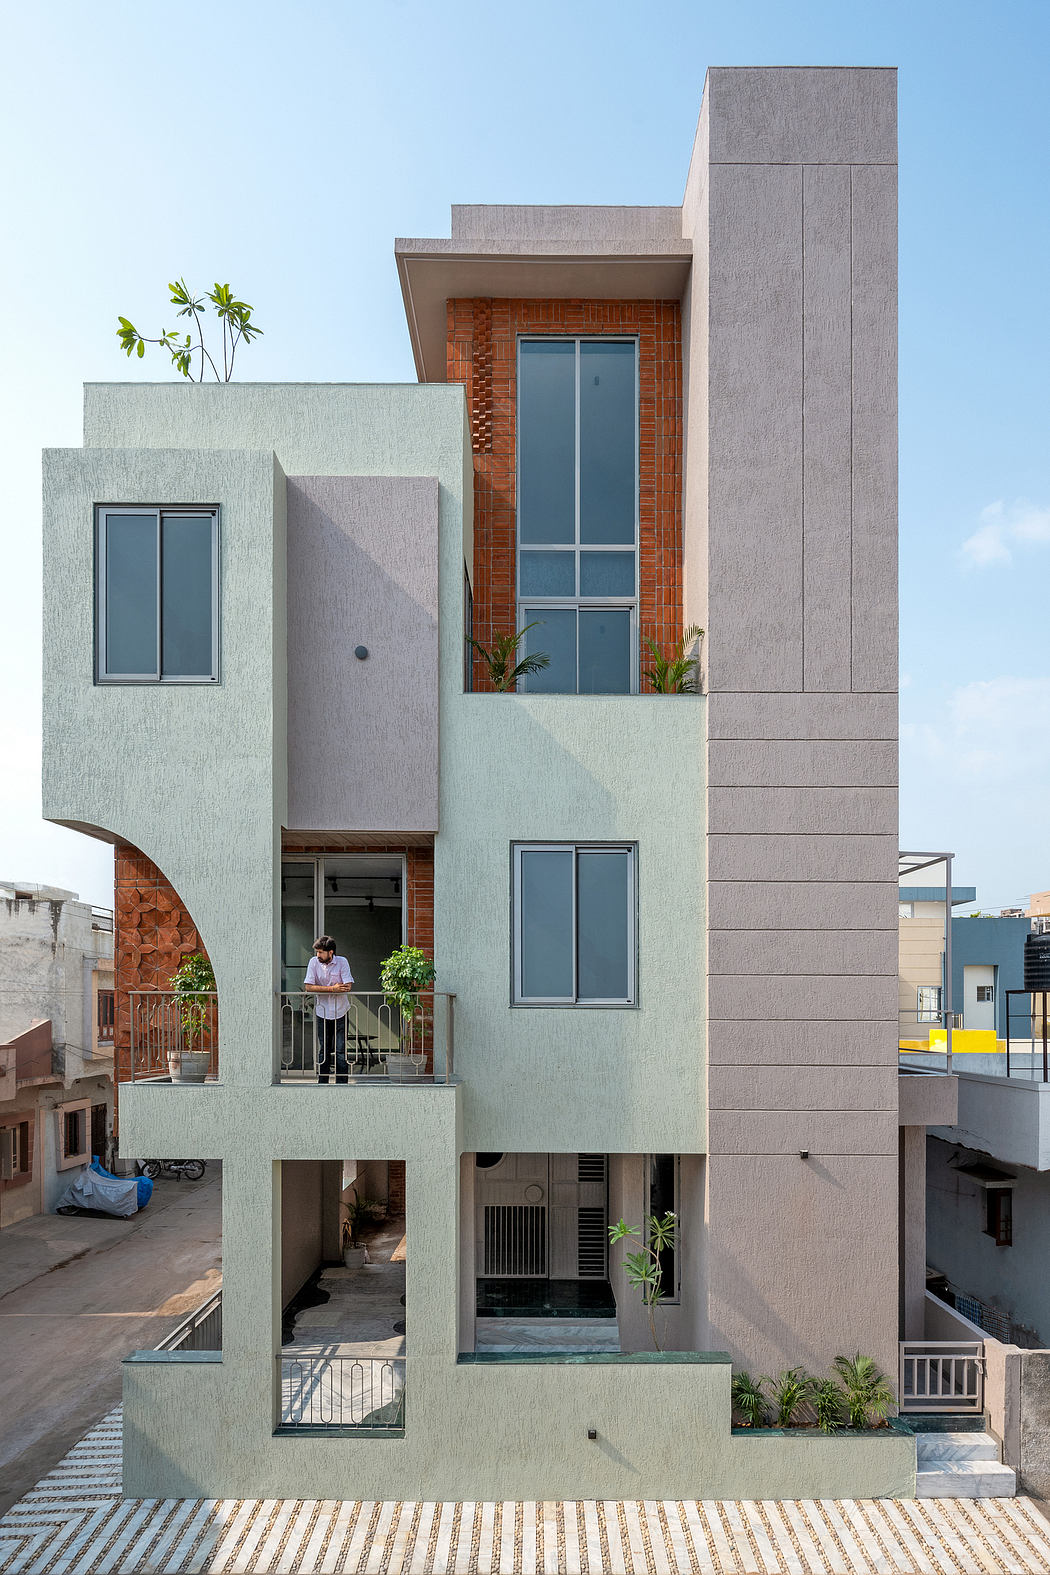 Modern multi-story residential building with clean geometric forms, contrasting materials, and balconies.